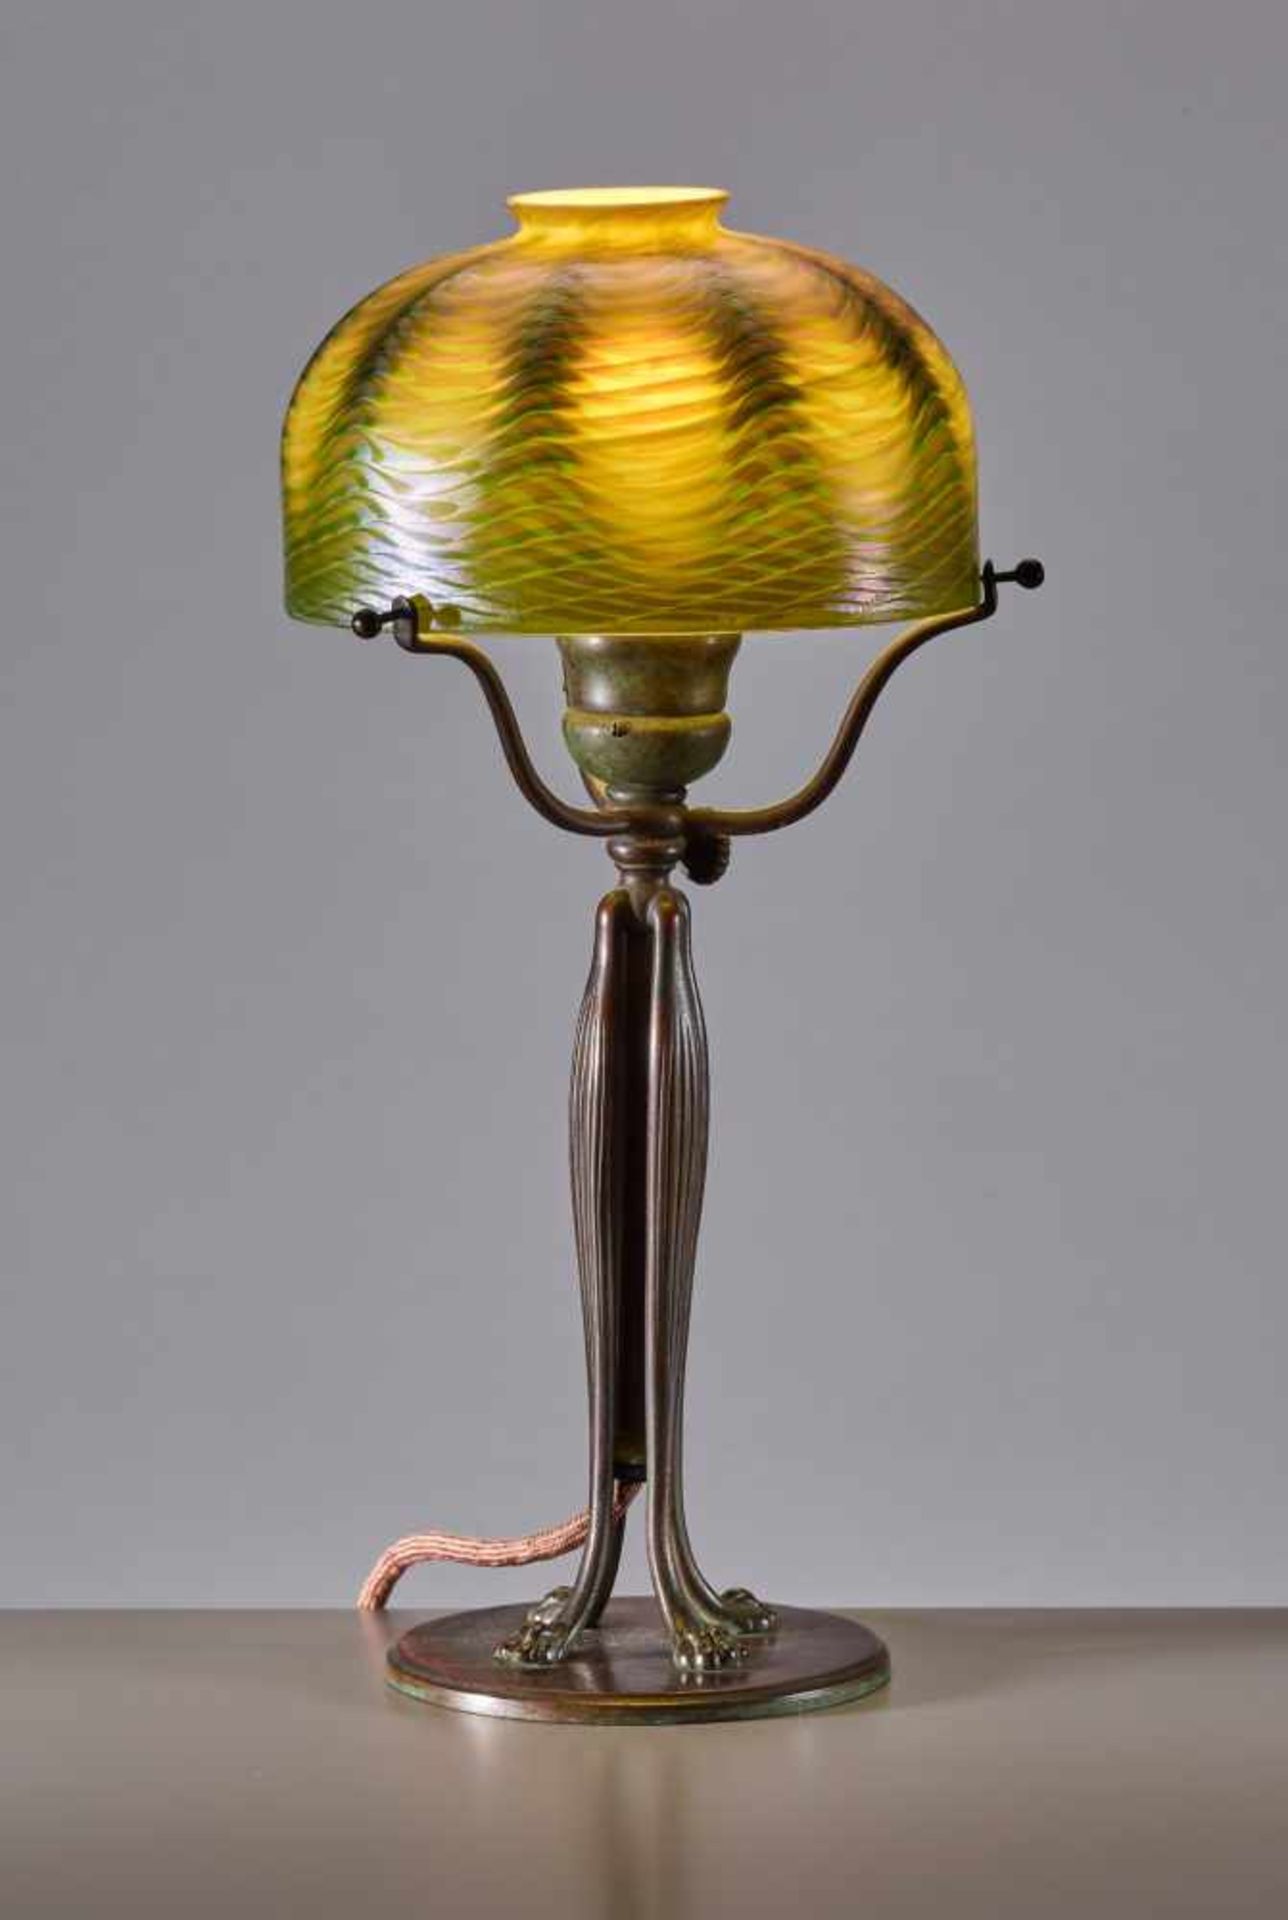 TIFFANY, FAVRILE TABLE LAMP, USA 1905Louis Comfort Tiffany (1848-1933) – American painter and - Image 2 of 10